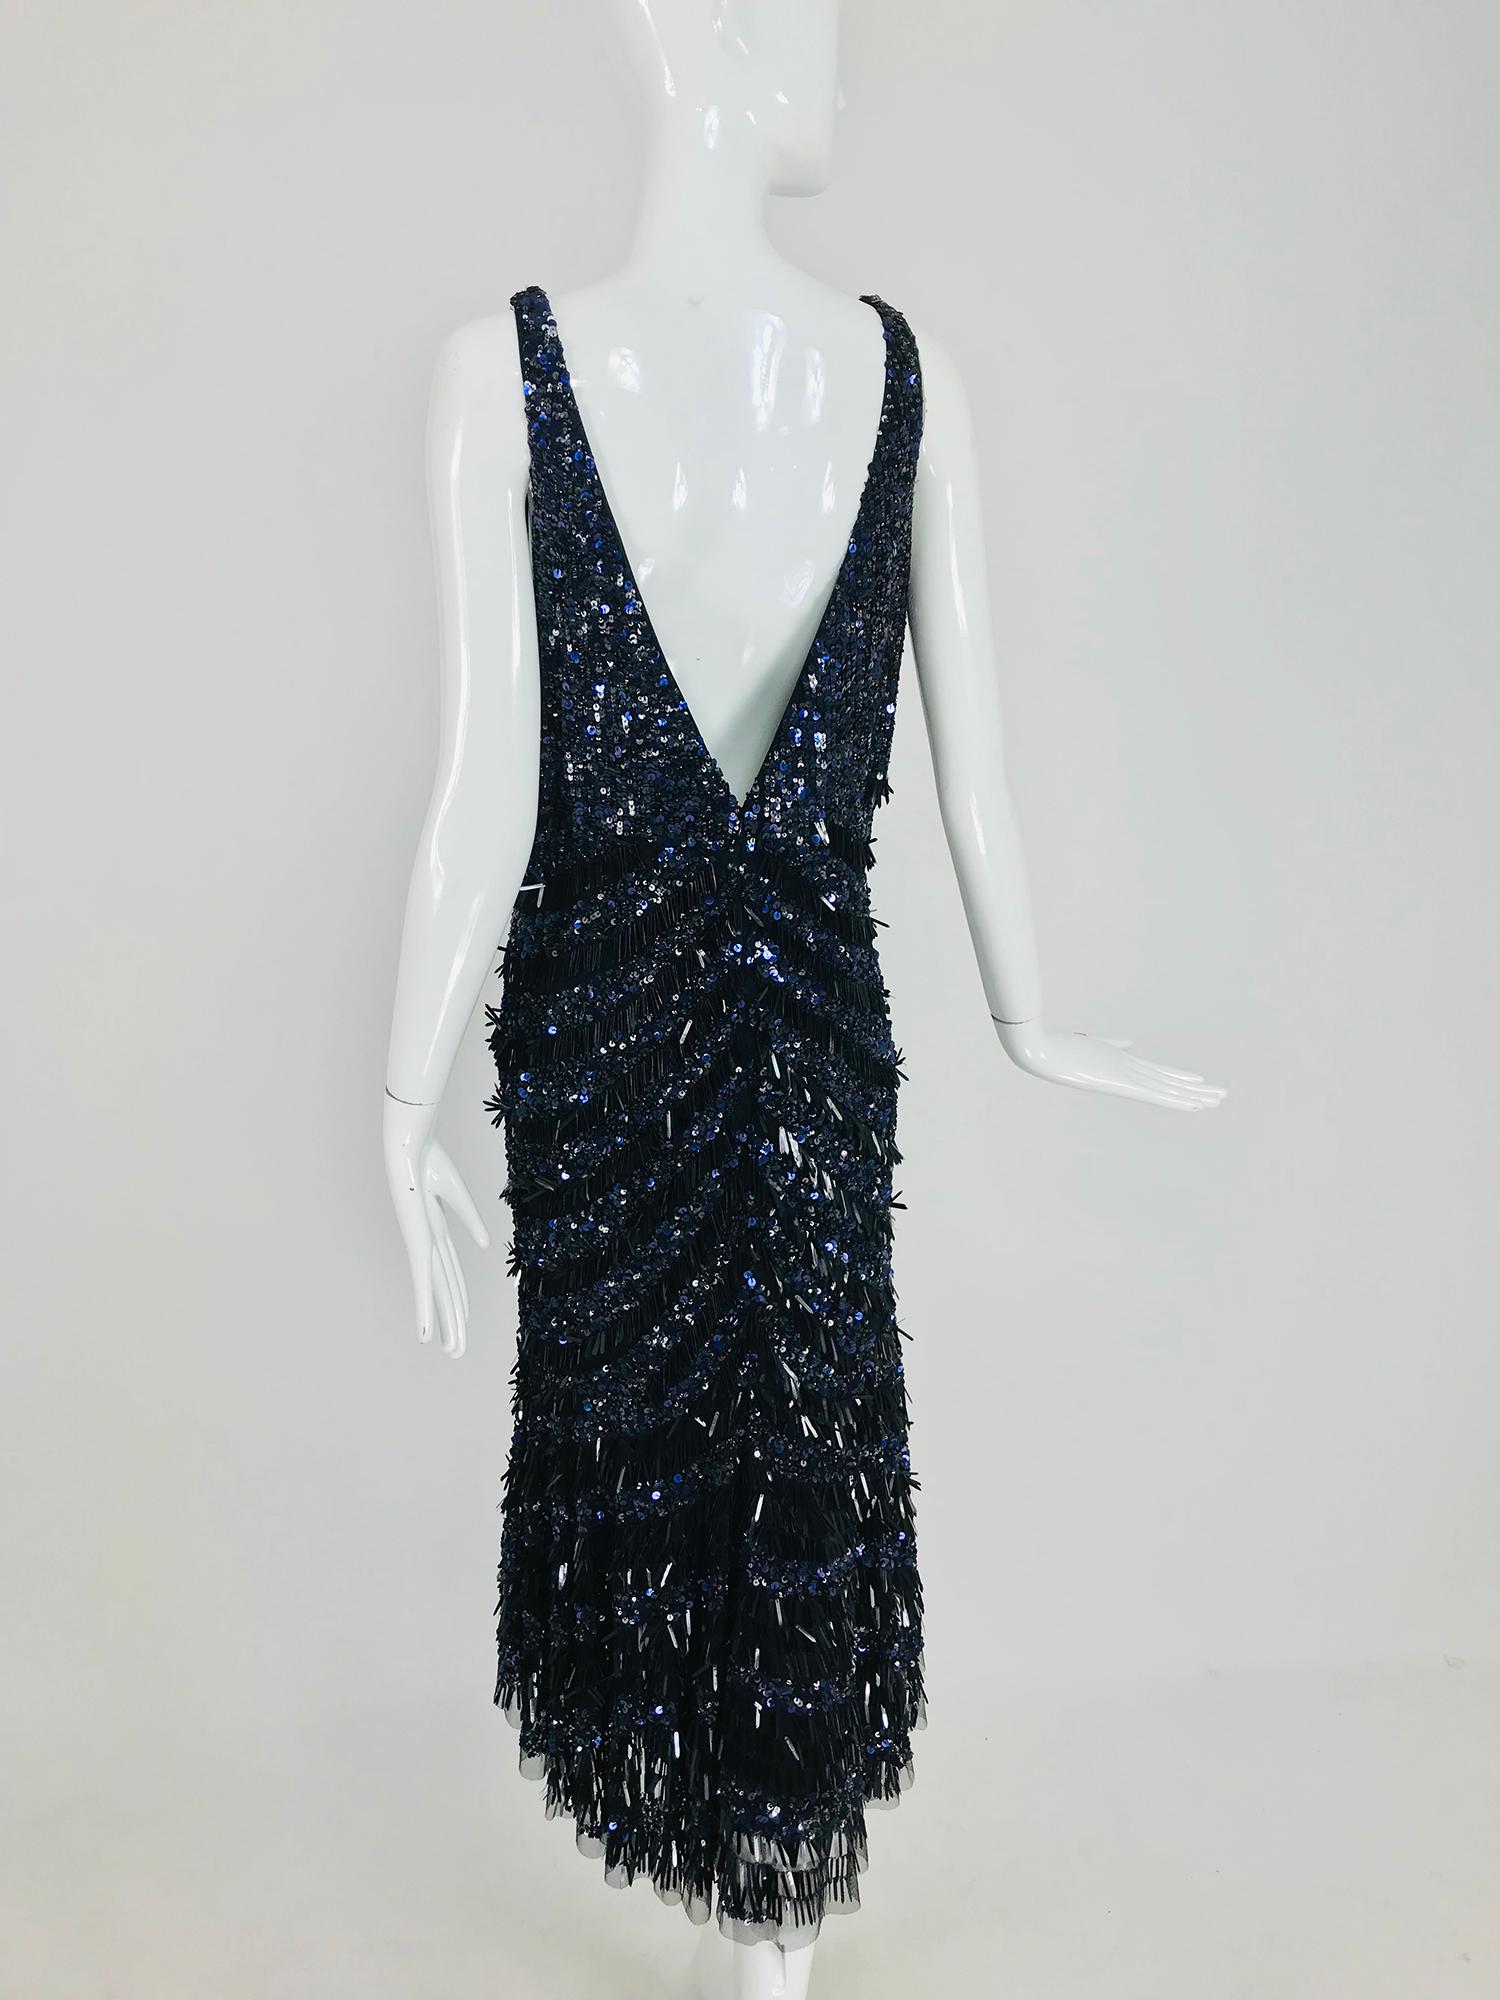 Theia Sequin Evening Cocktail Dress in Black and Blue 12 6